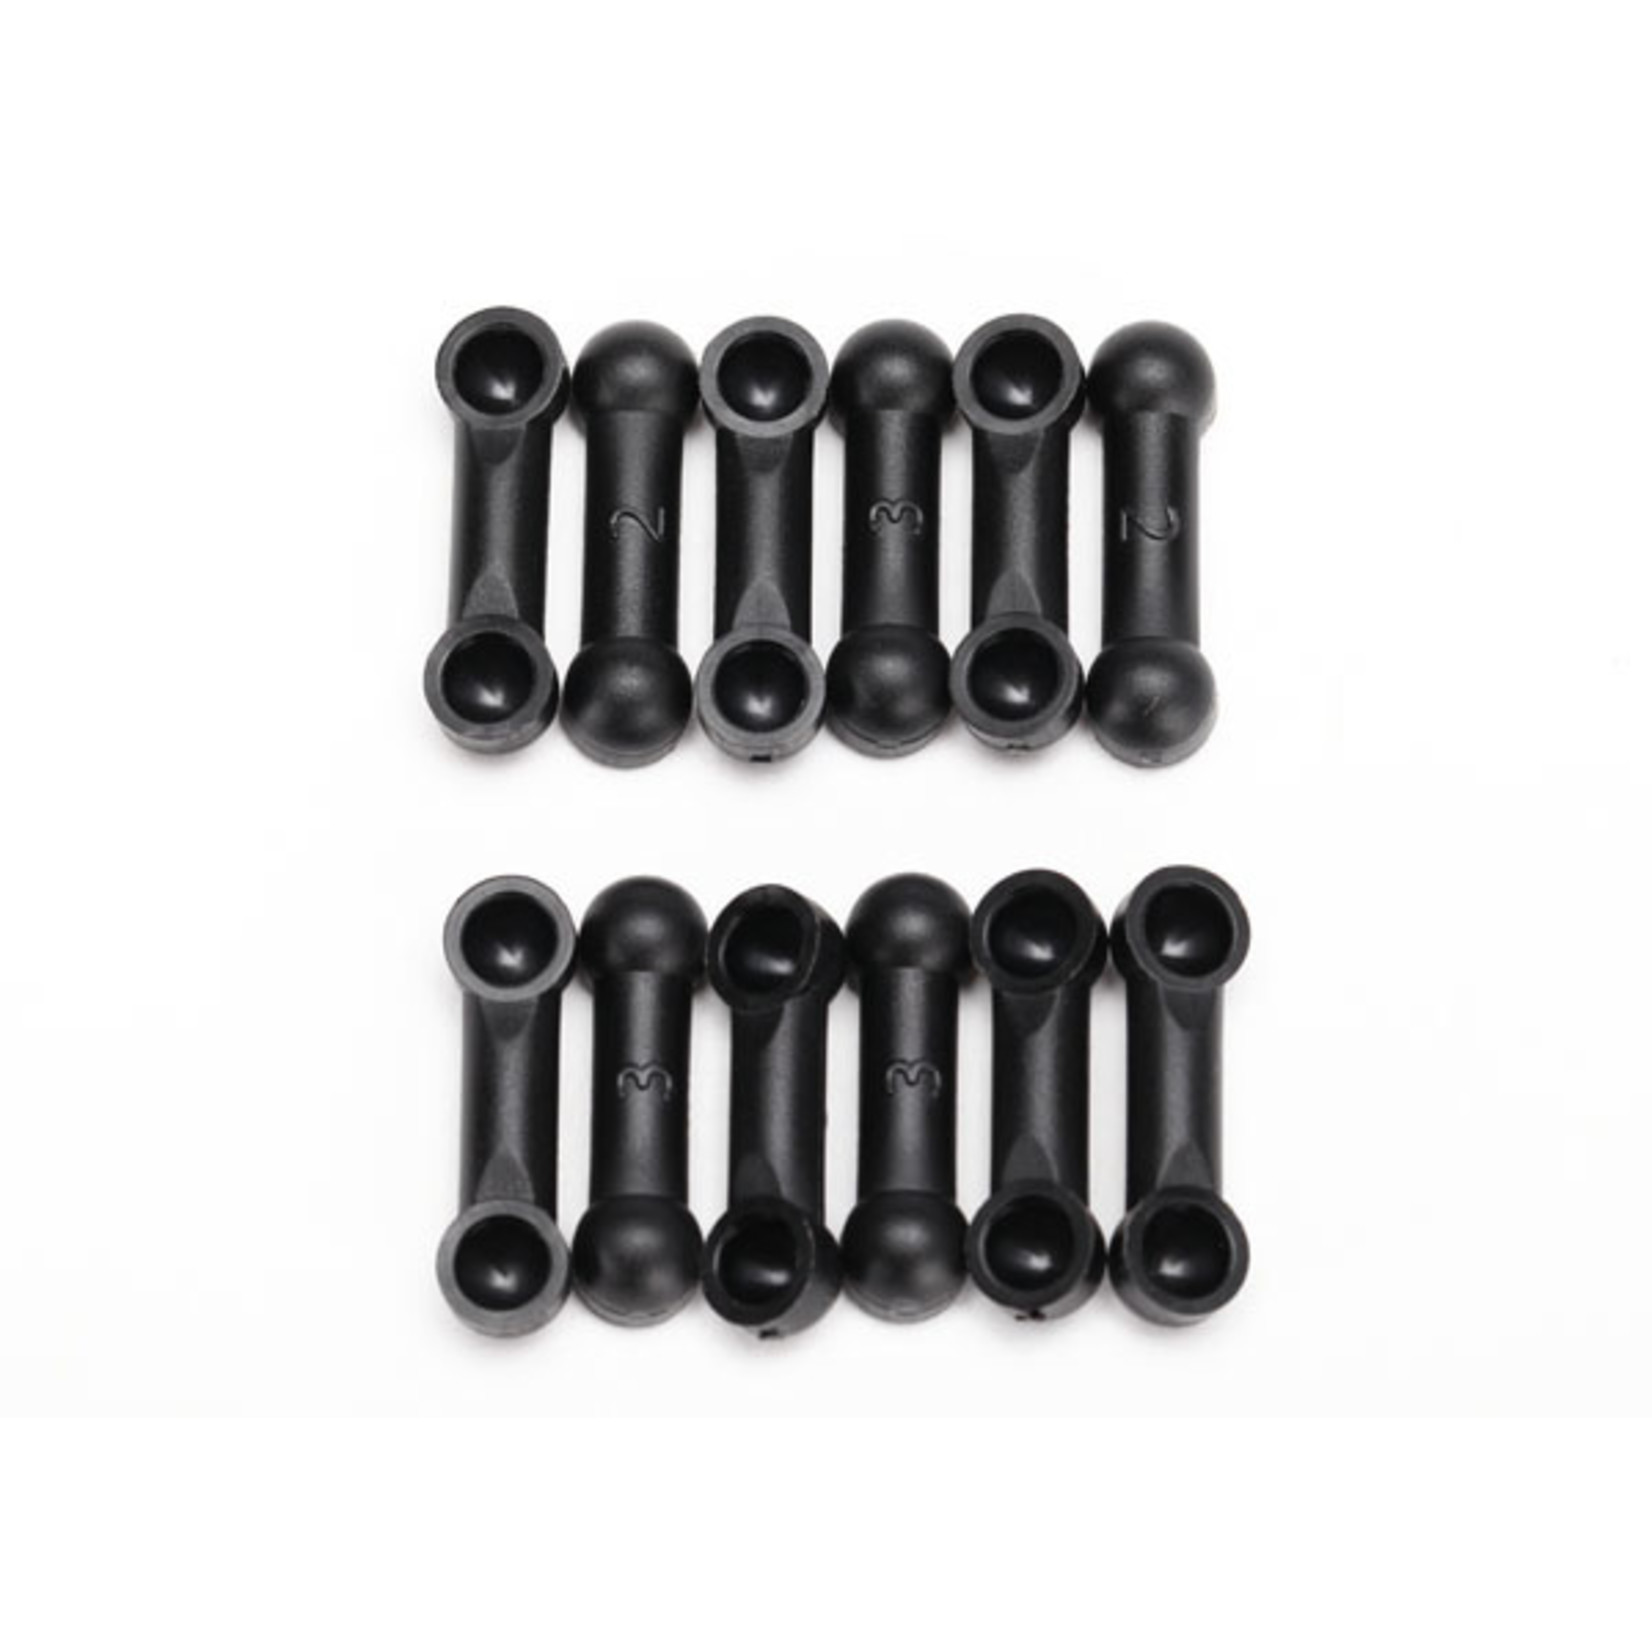 Traxxas 7539 - Camber rods, 2-degree/3-degree (6 each)